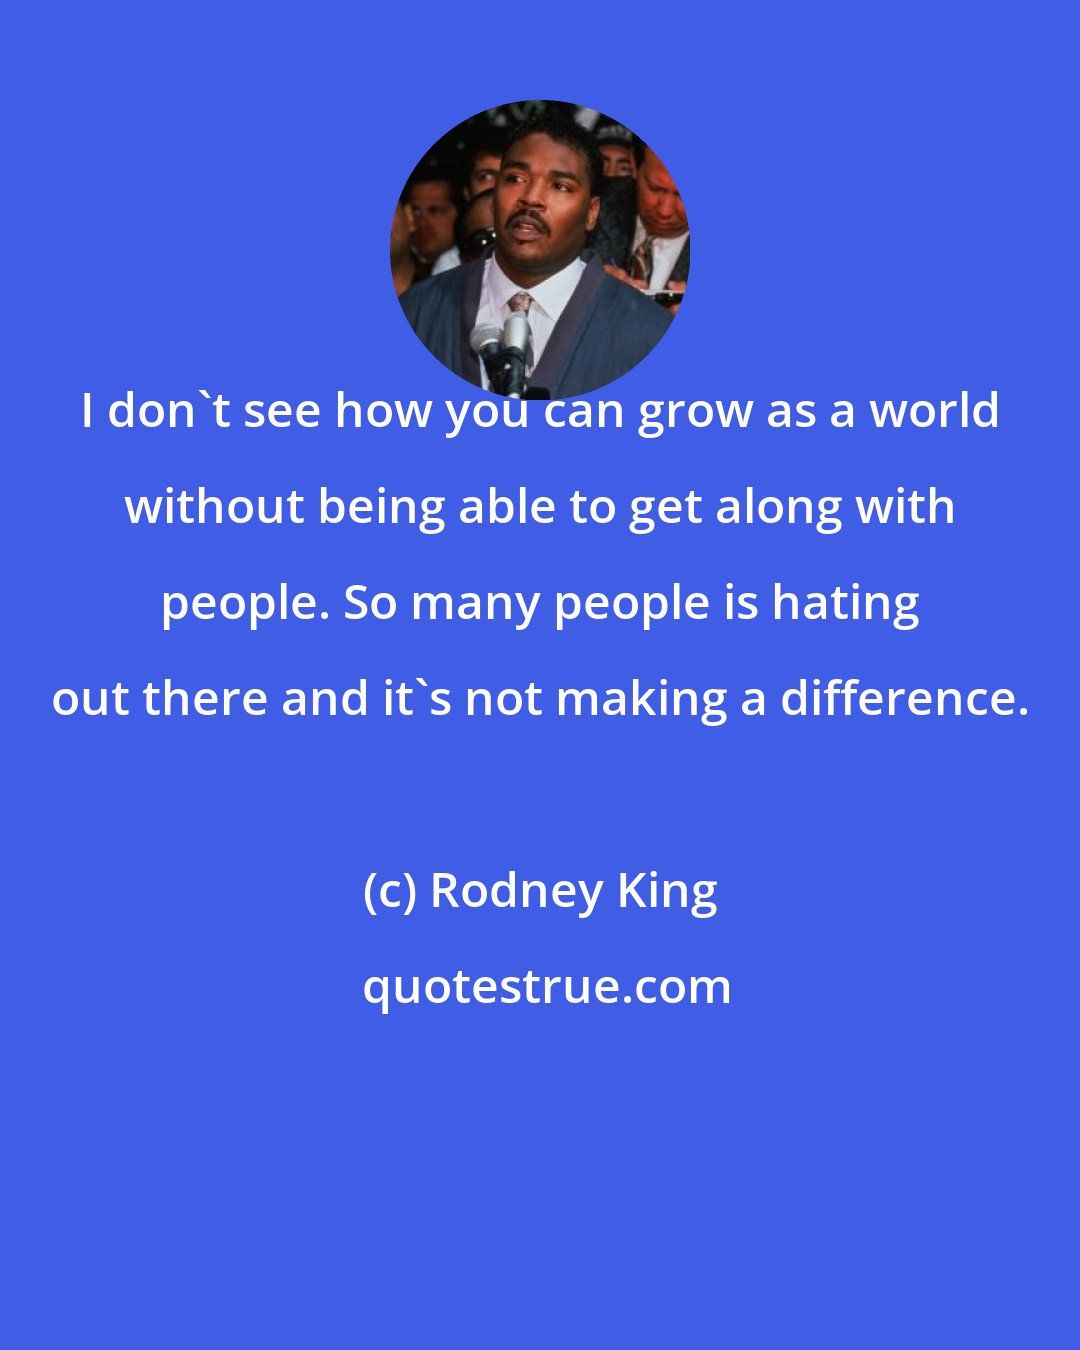 Rodney King: I don't see how you can grow as a world without being able to get along with people. So many people is hating out there and it's not making a difference.